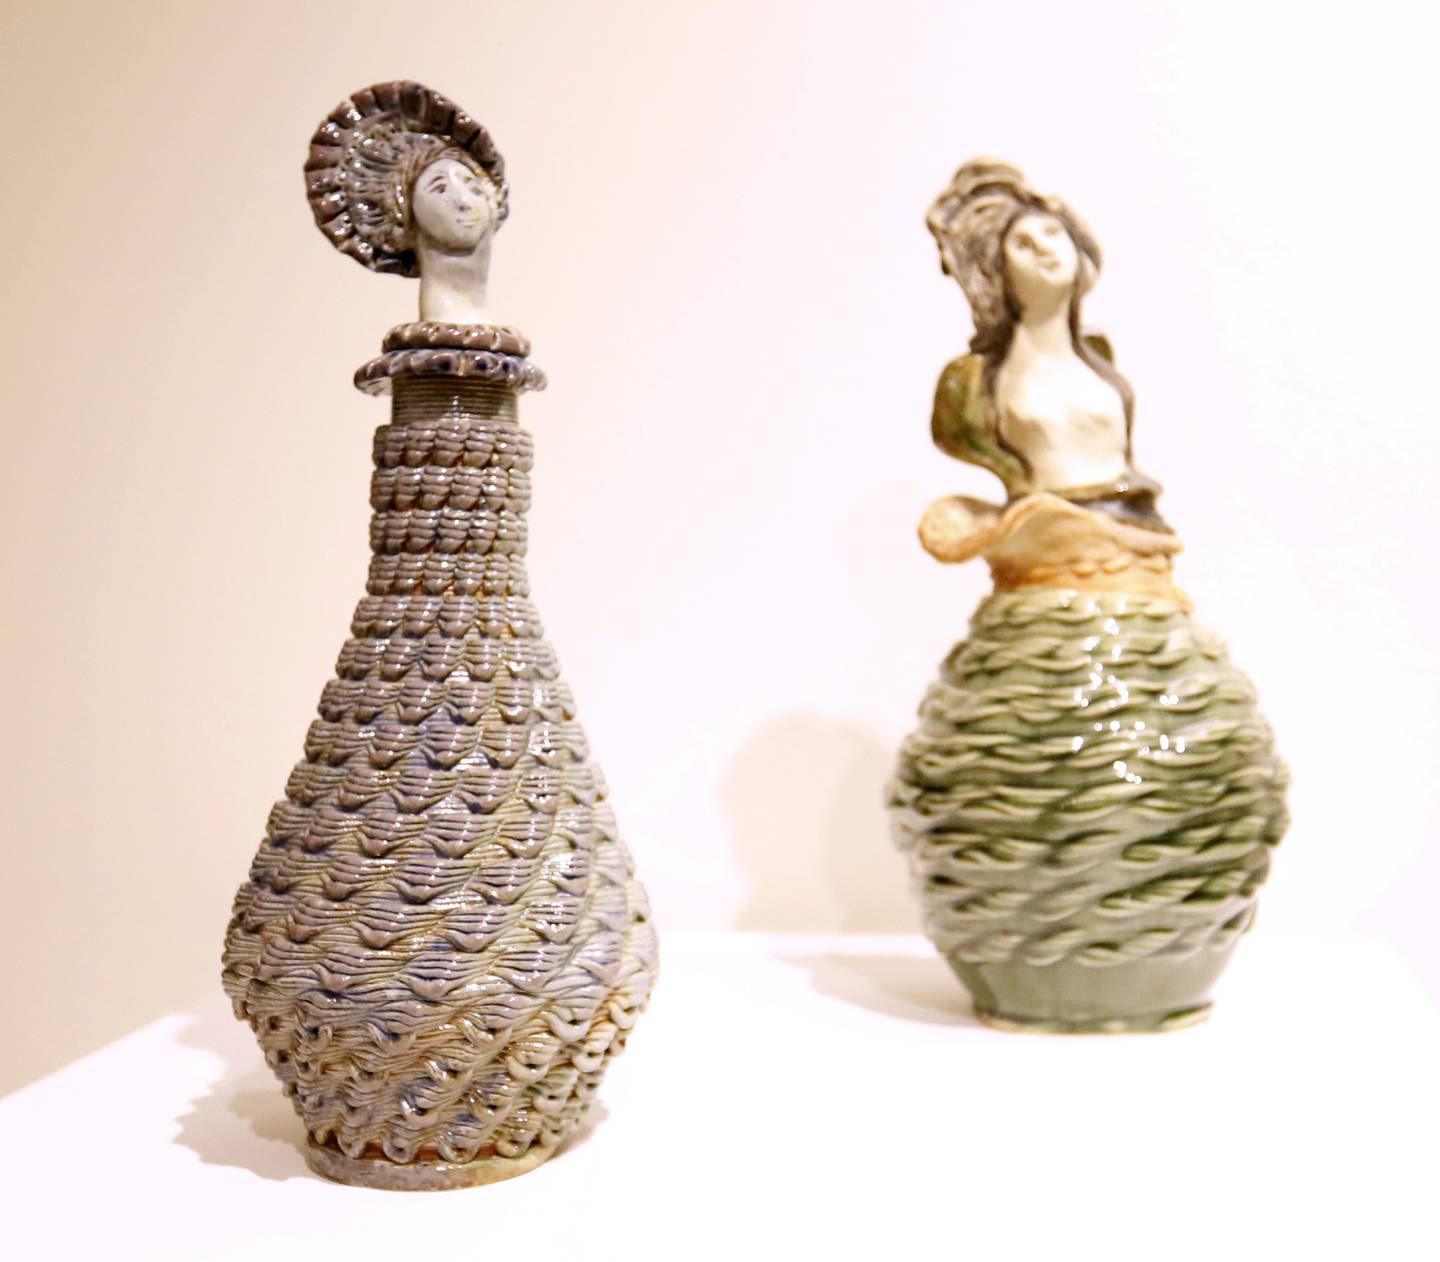 Ceramic activist art created by McHenry County College student Elaine Kadakia, 83, is being exhibited at the gallery at the college through Monday, Sept. 19, 2022.